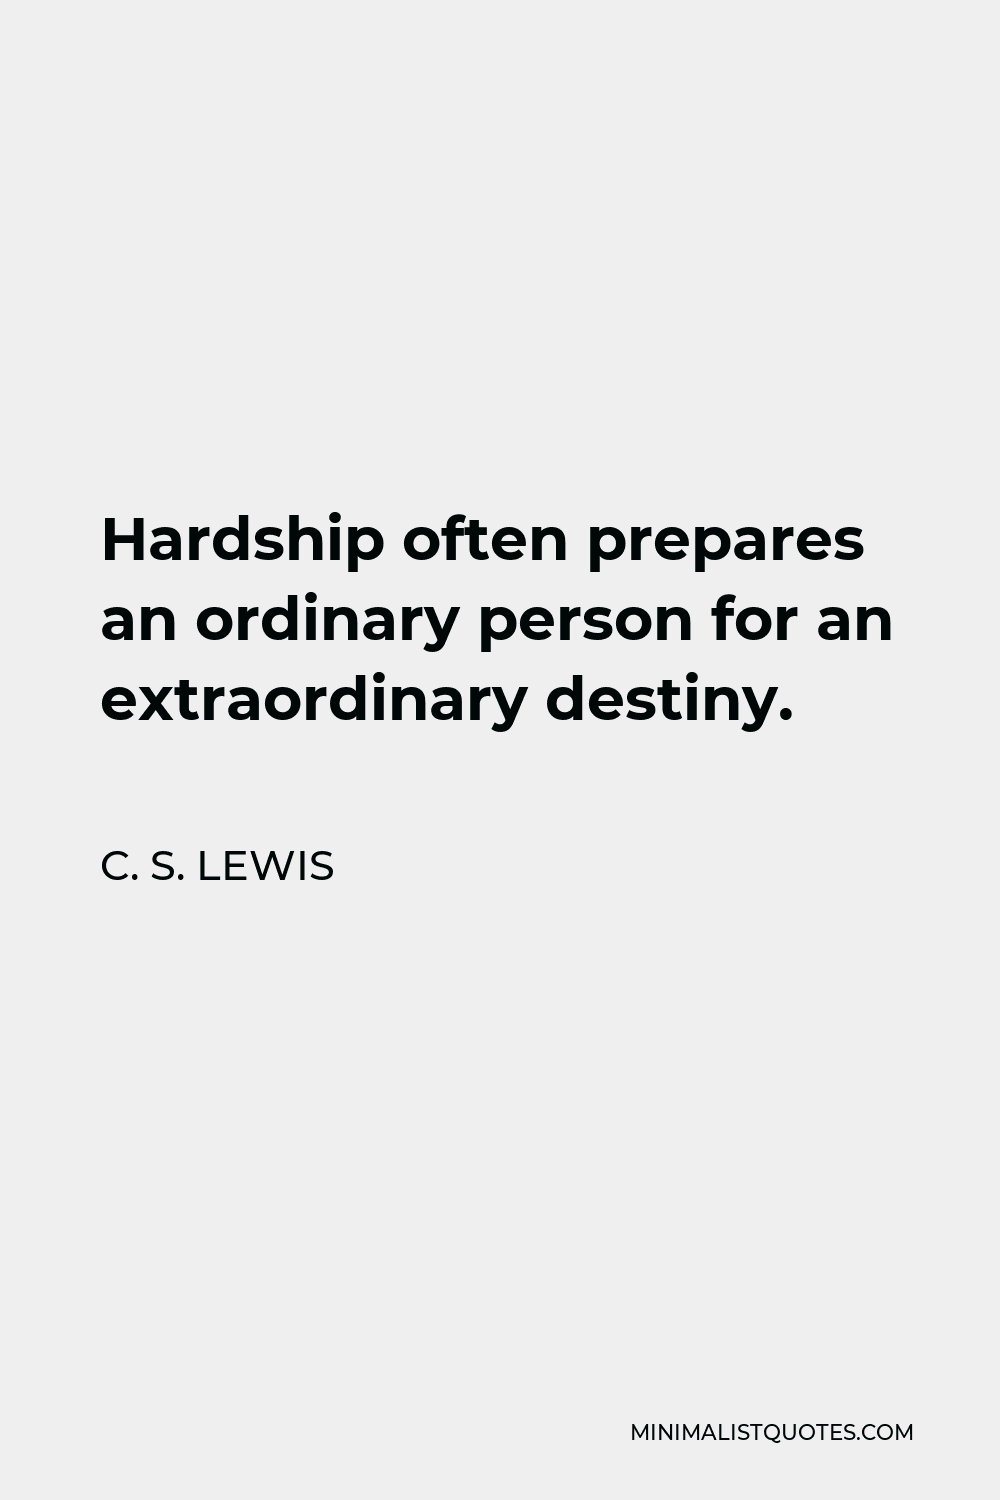 C. S. Lewis Quote: Hardship often prepares an ordinary person for an ...